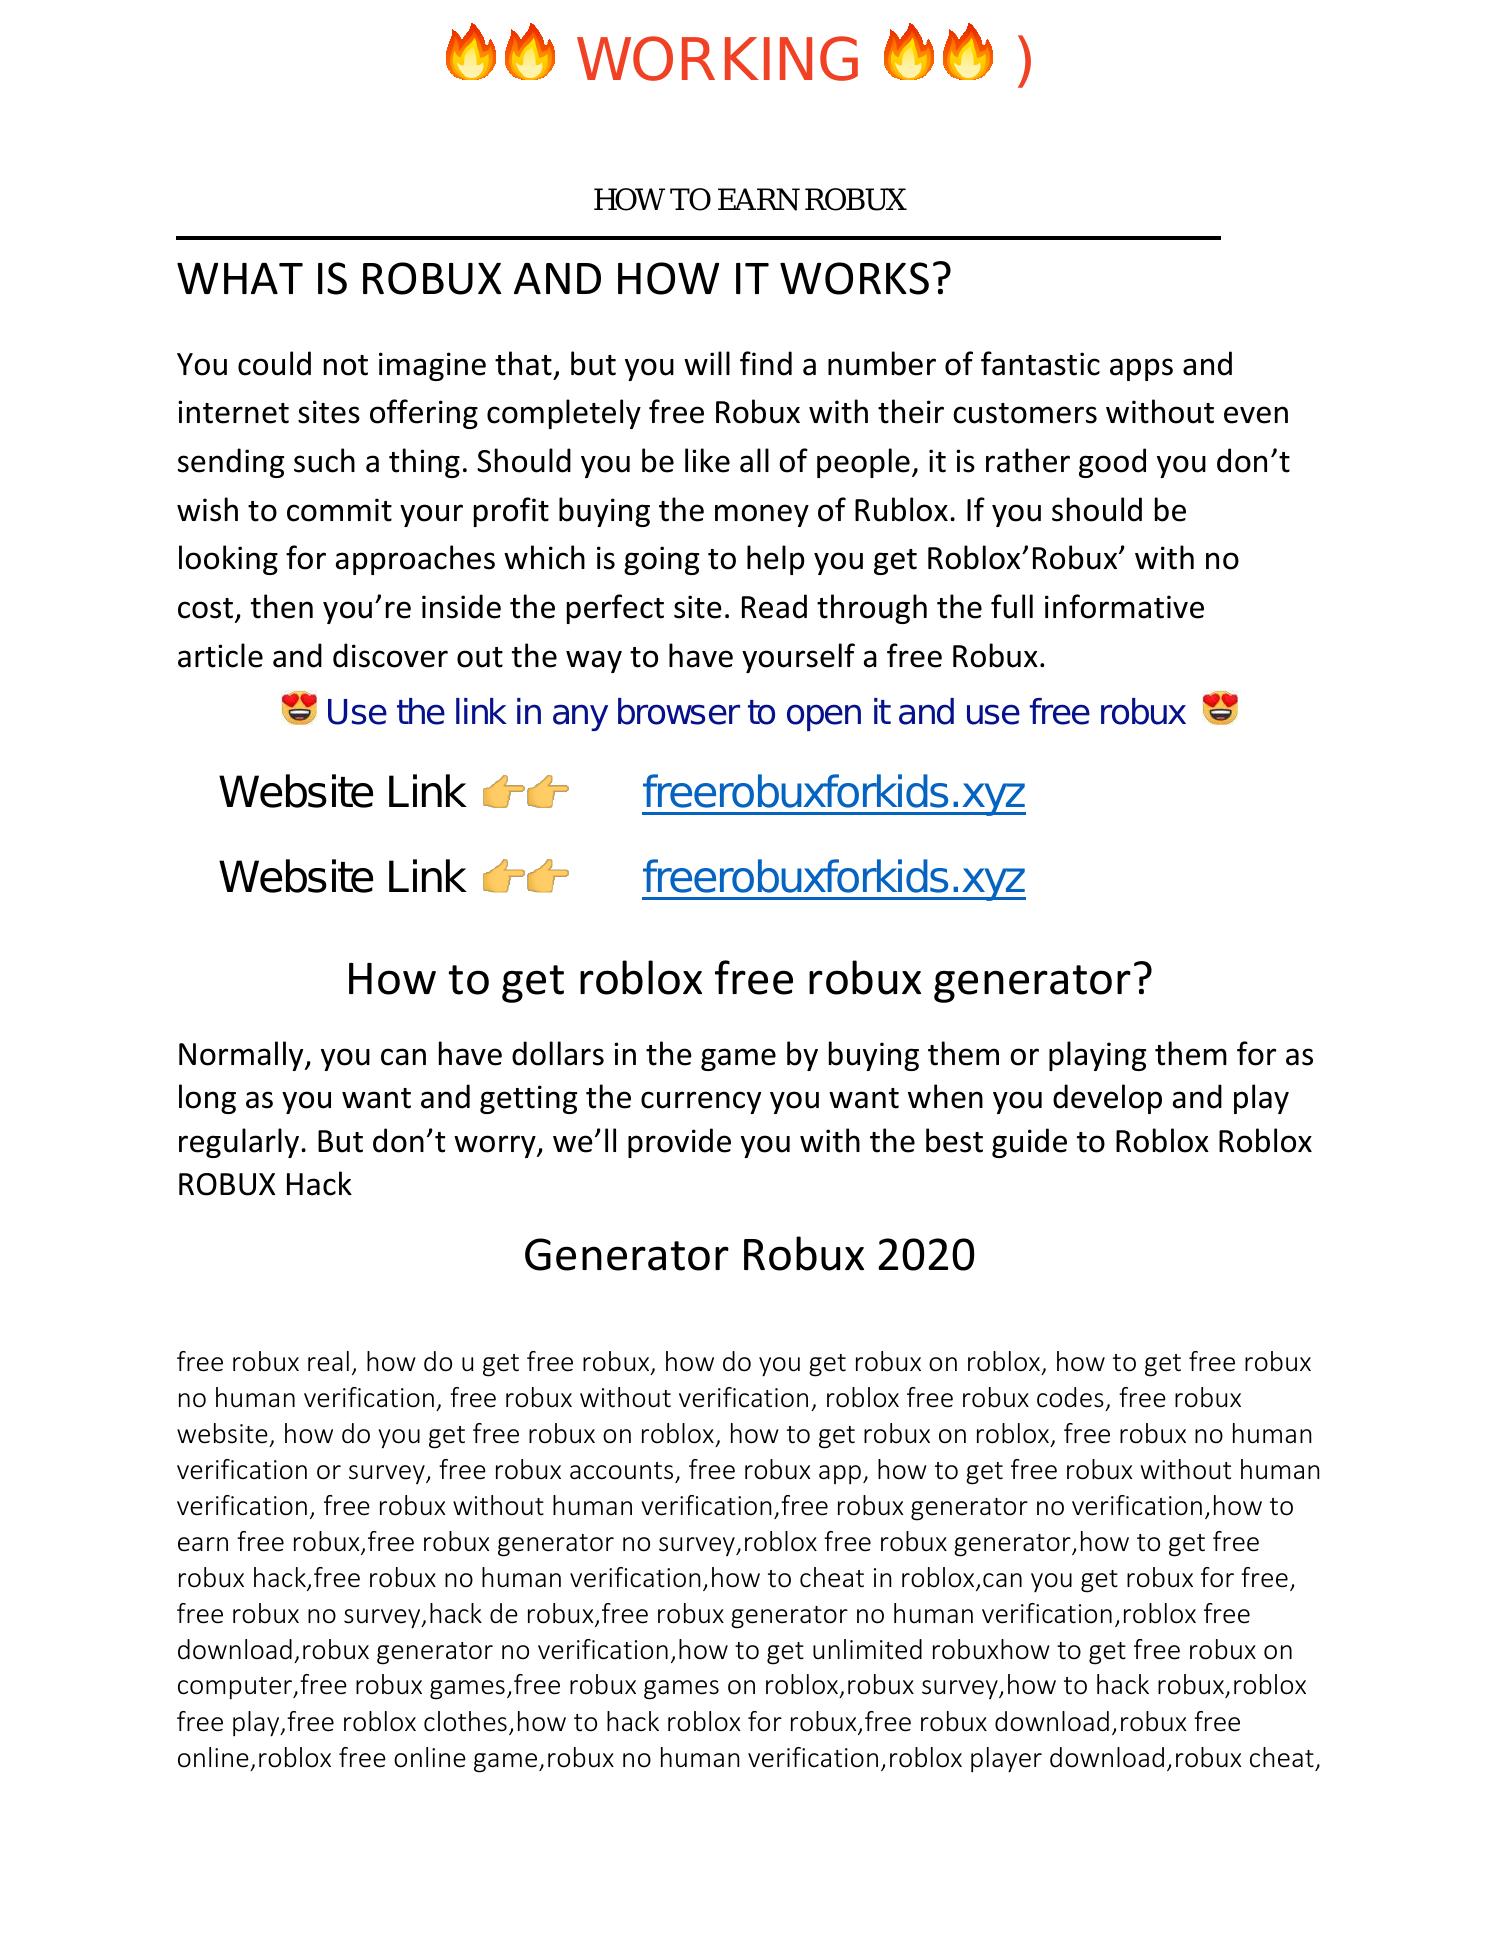 Roblox How To Get Robux Hack